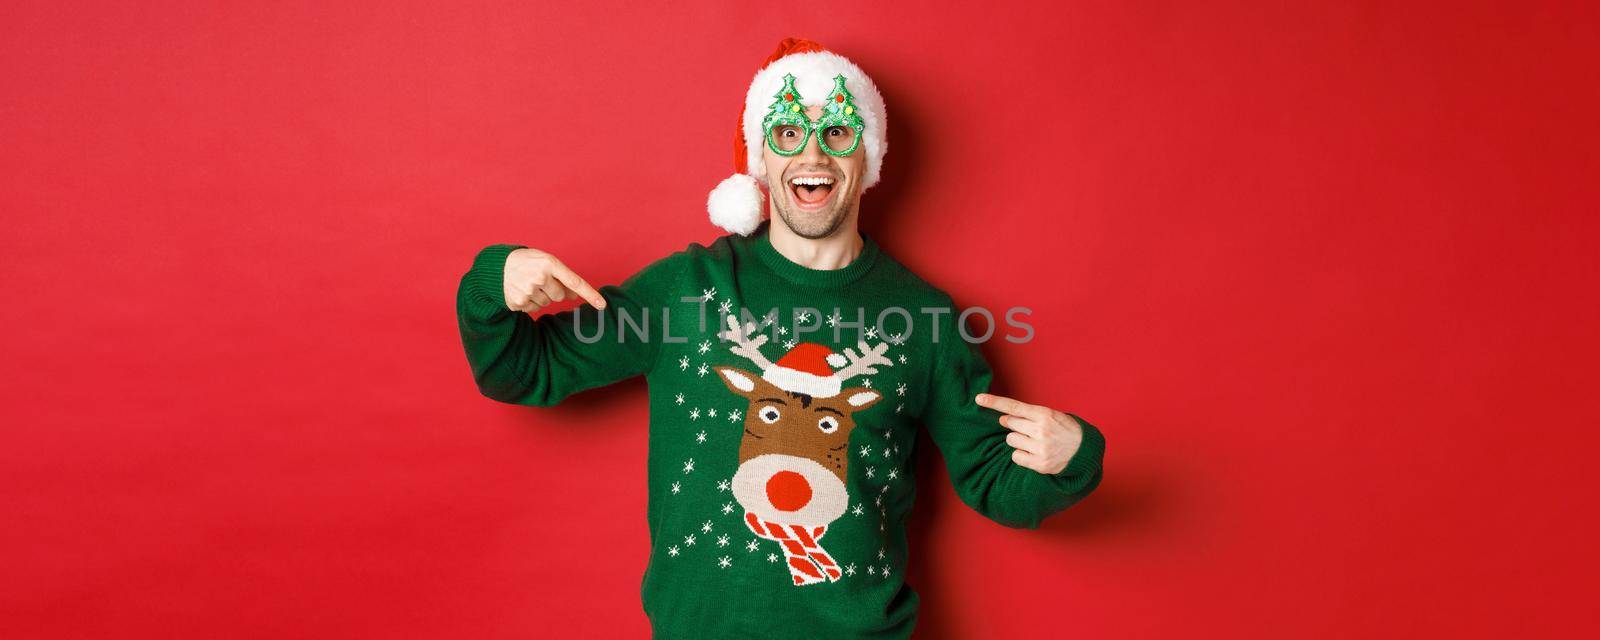 Image of happy man in party glasses and santa hat, pointing at his christmas sweater and smiling, standing over red background.